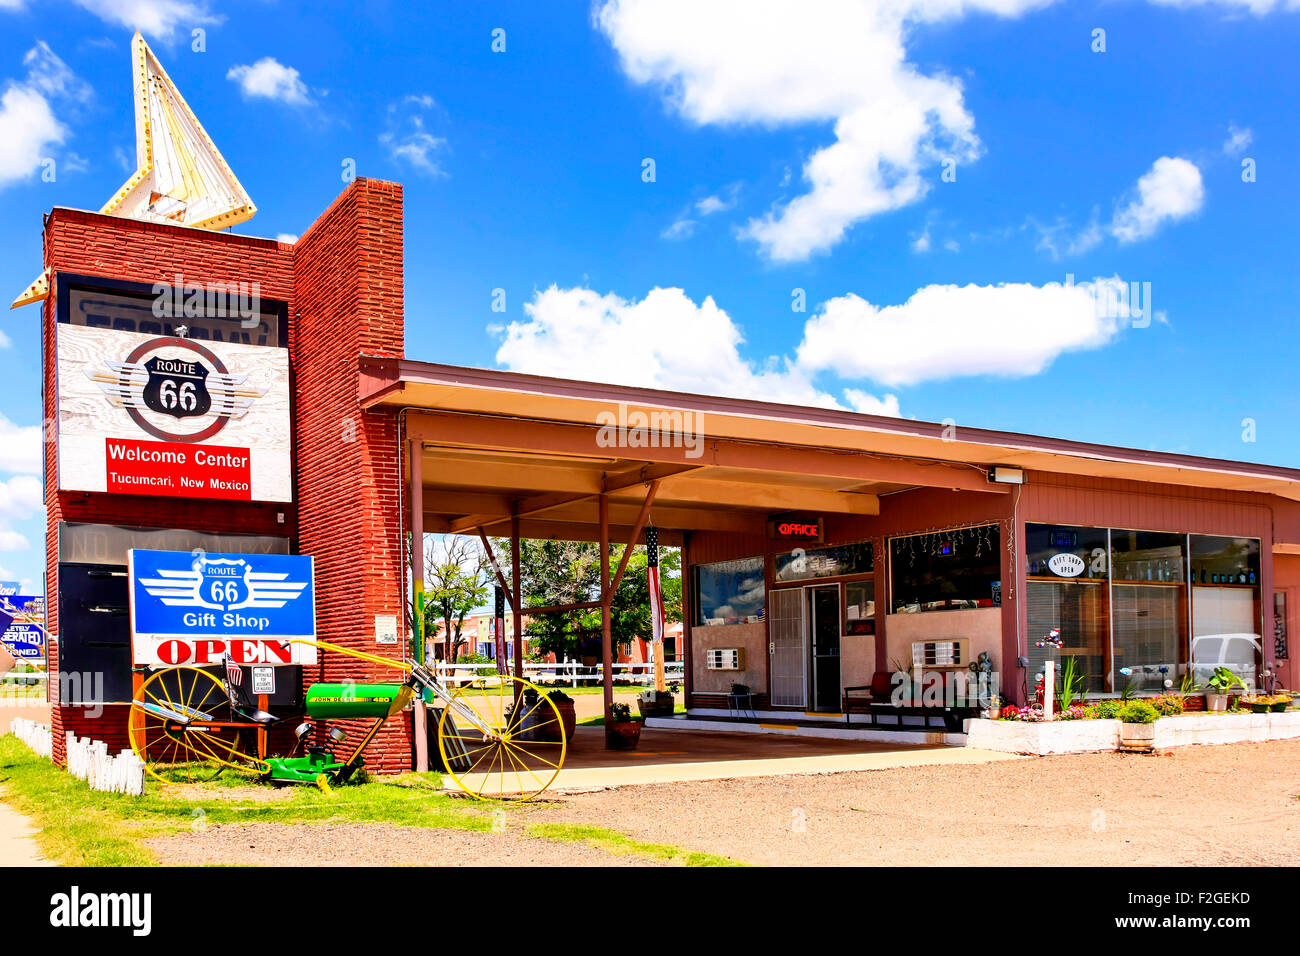 Route 66 Welcome Center and Gift Shop in Tucumcari, New Mexico Stock Photo